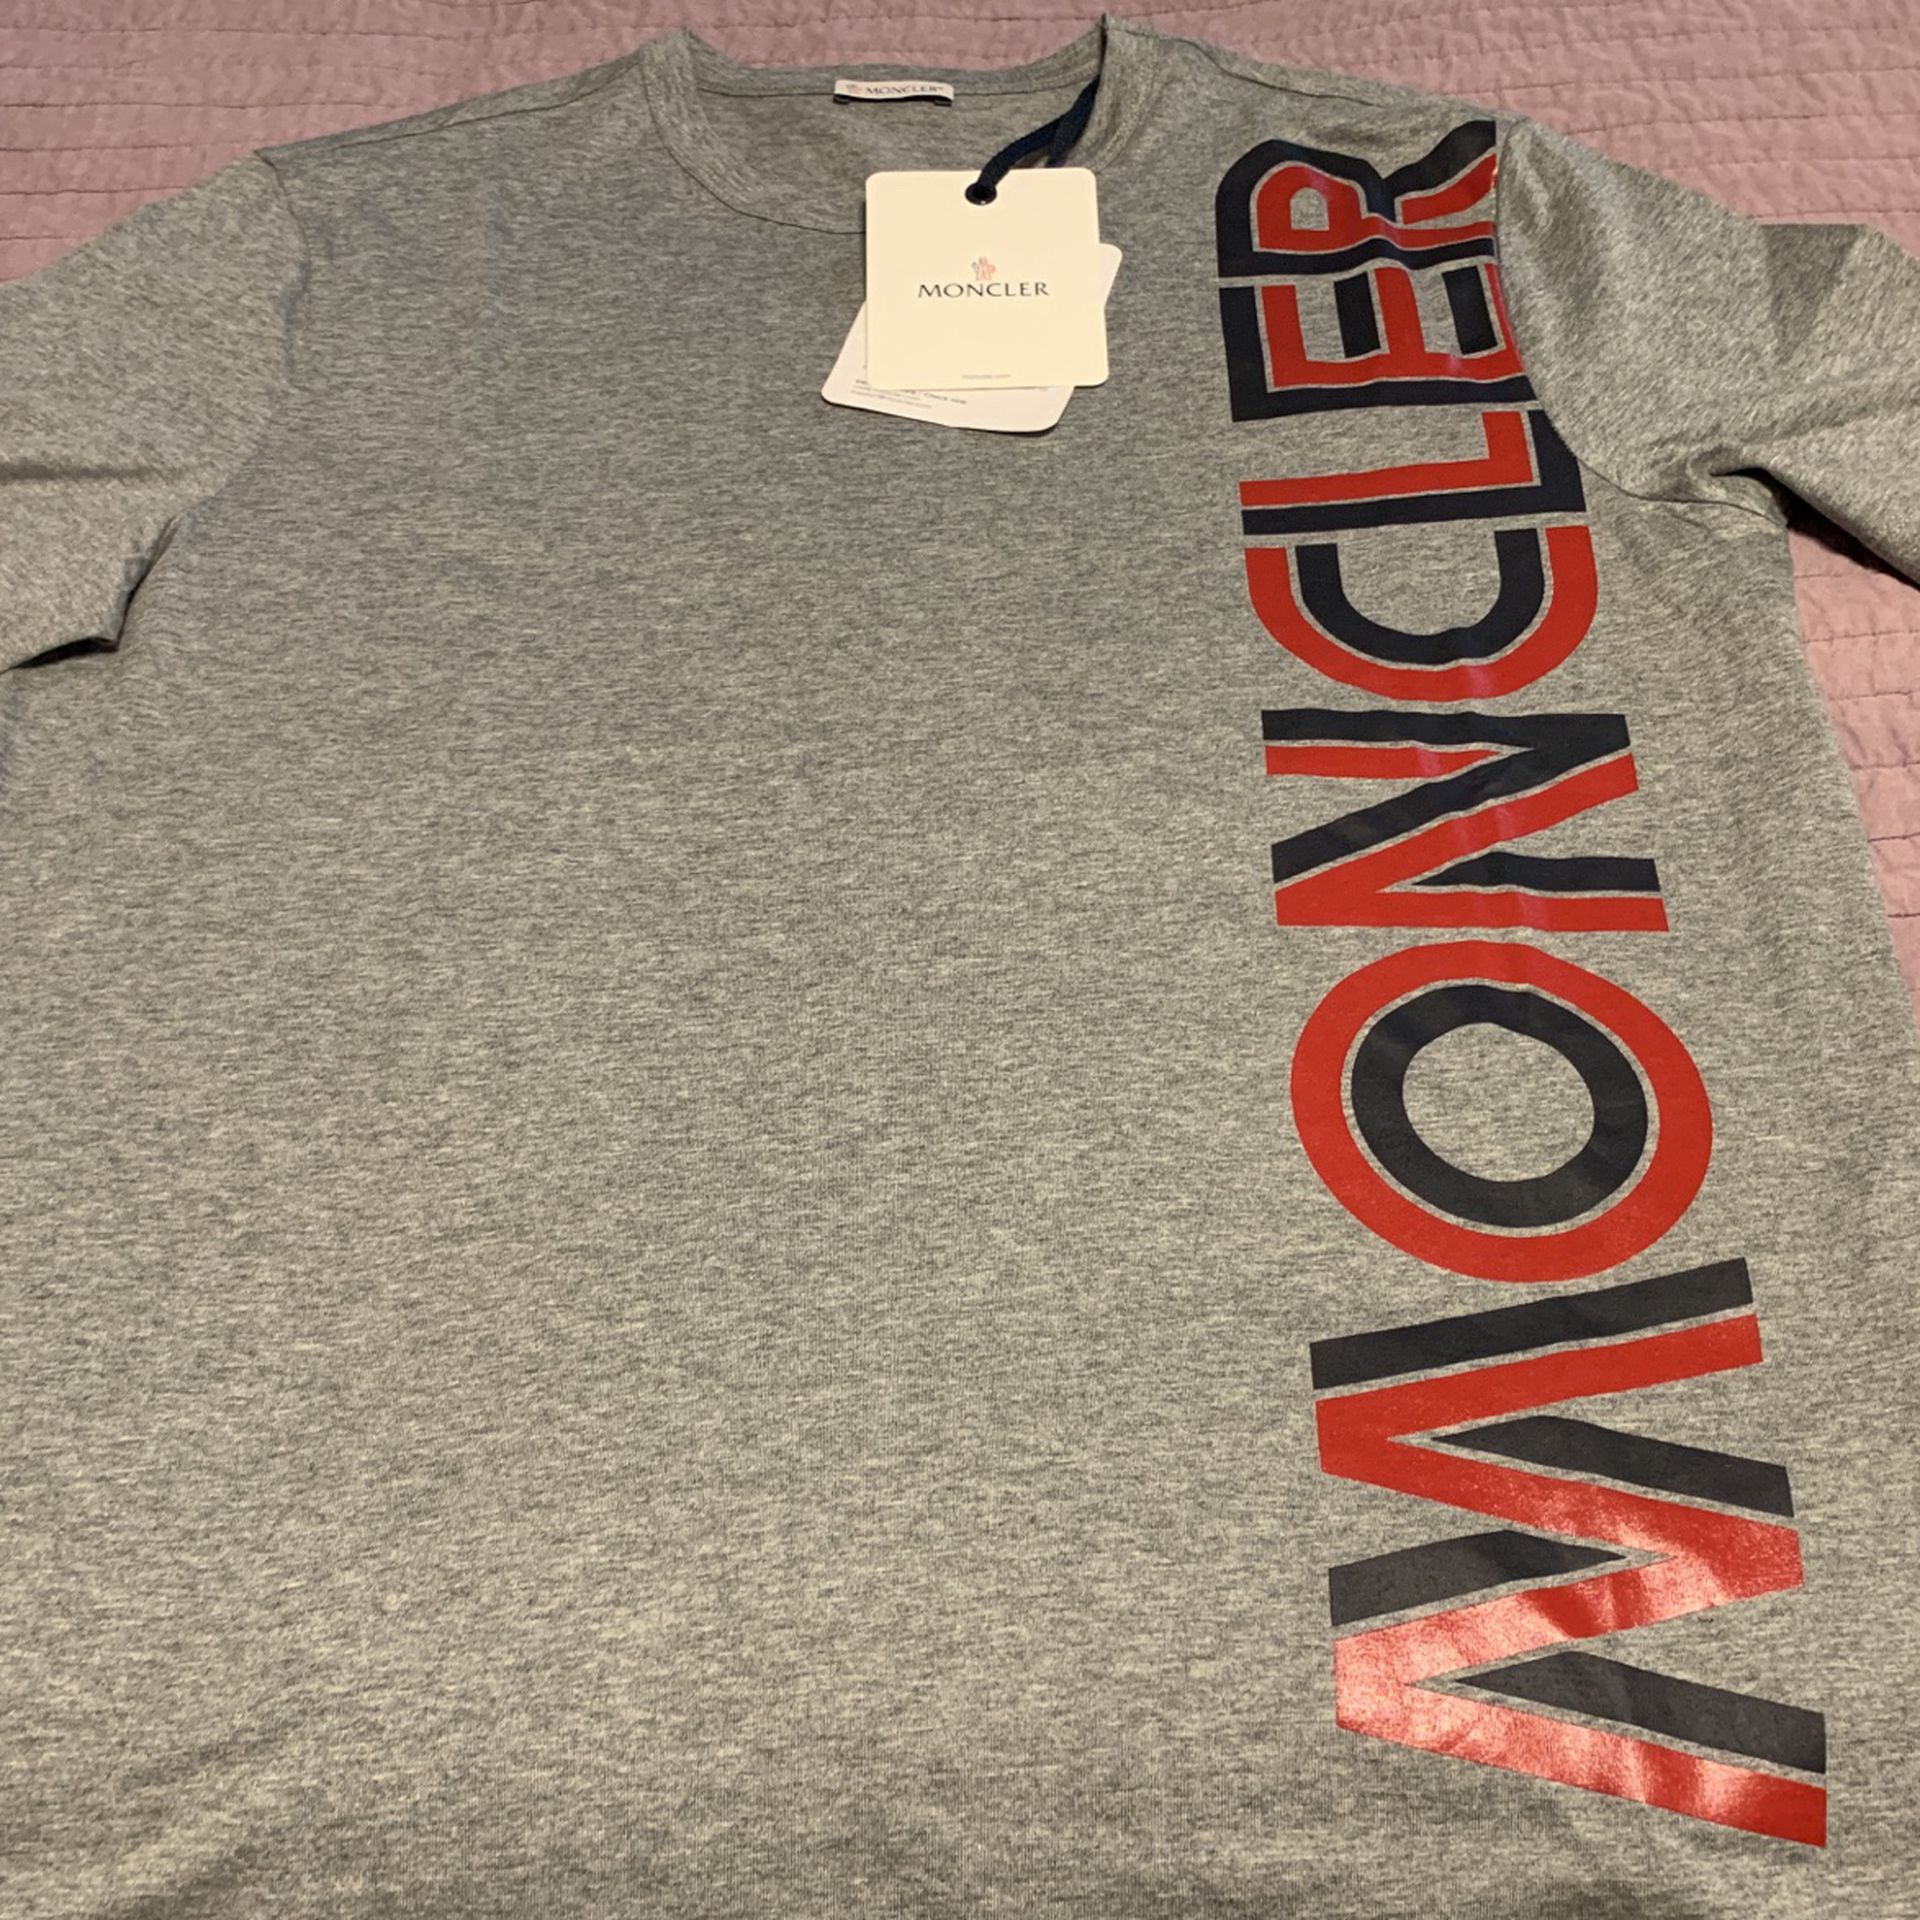 Moncler Maglia T Shirt   Size M   Brand New With All Tags